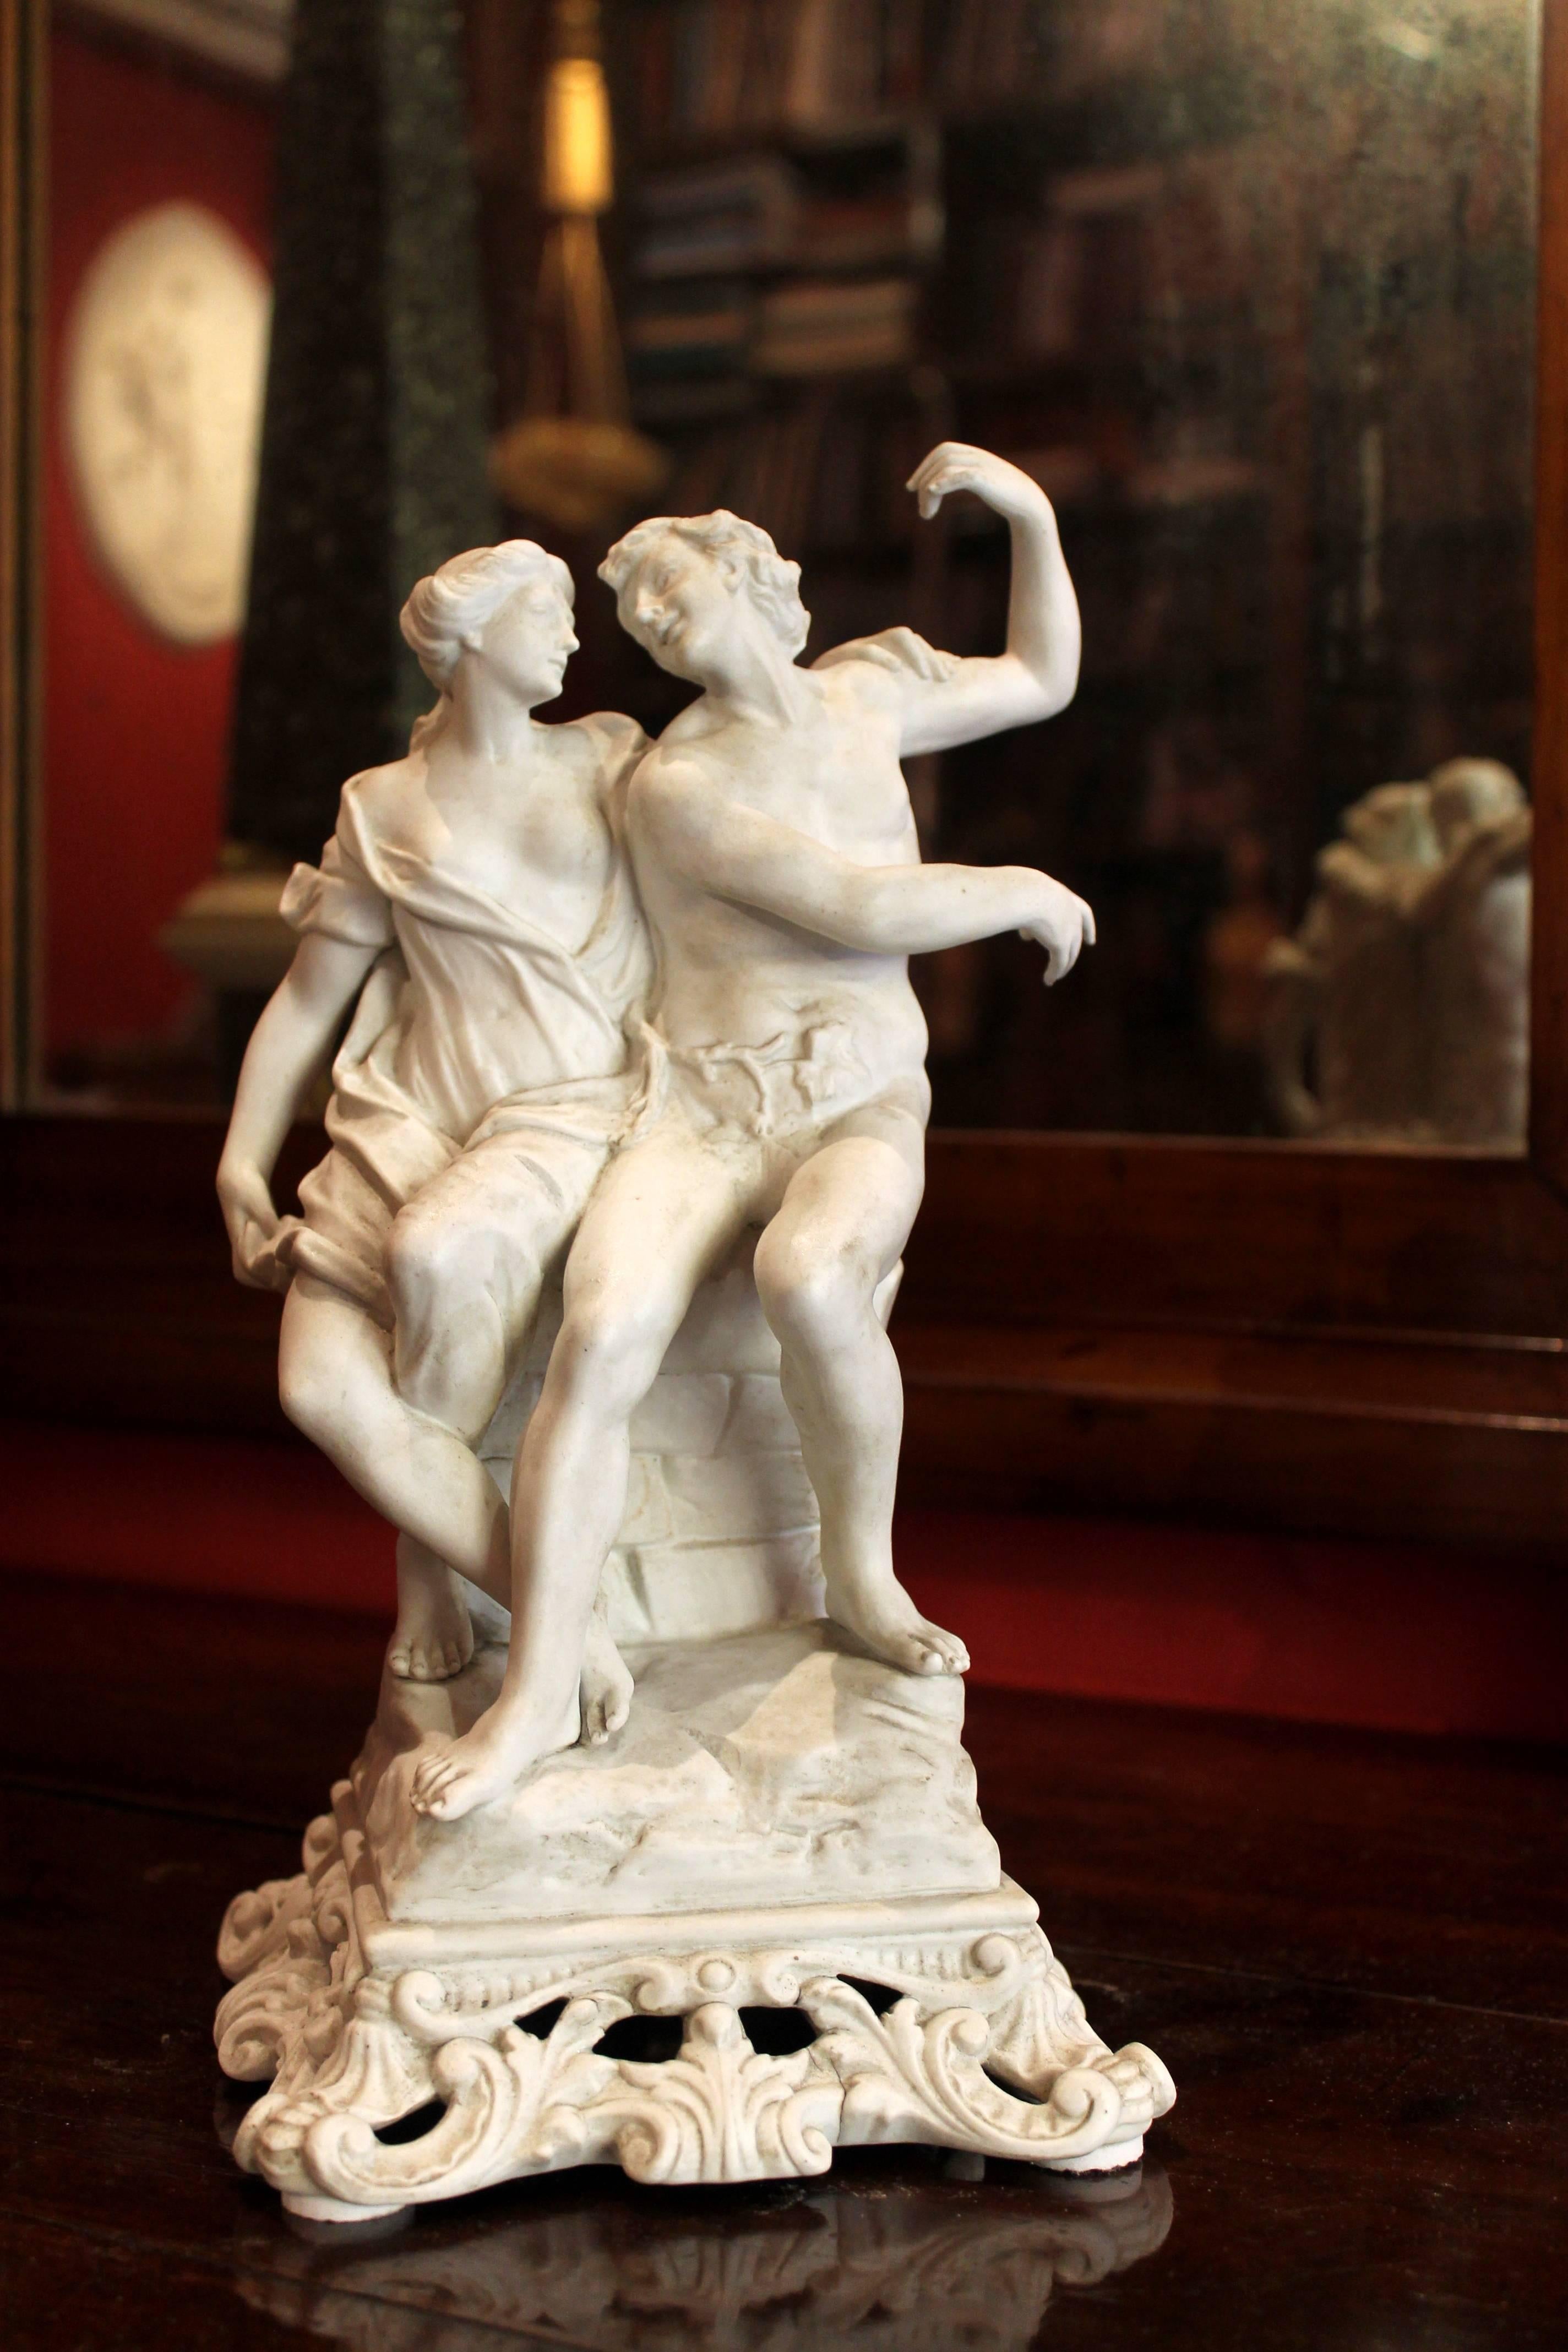 A lovely antique Italian Capodimonte white porcelain biscuit male and female figurines sculptured in the round depicting in a very romantic moment. This centrepiece group features two nude draped young lovers sitting on a pedestal sculptured as a